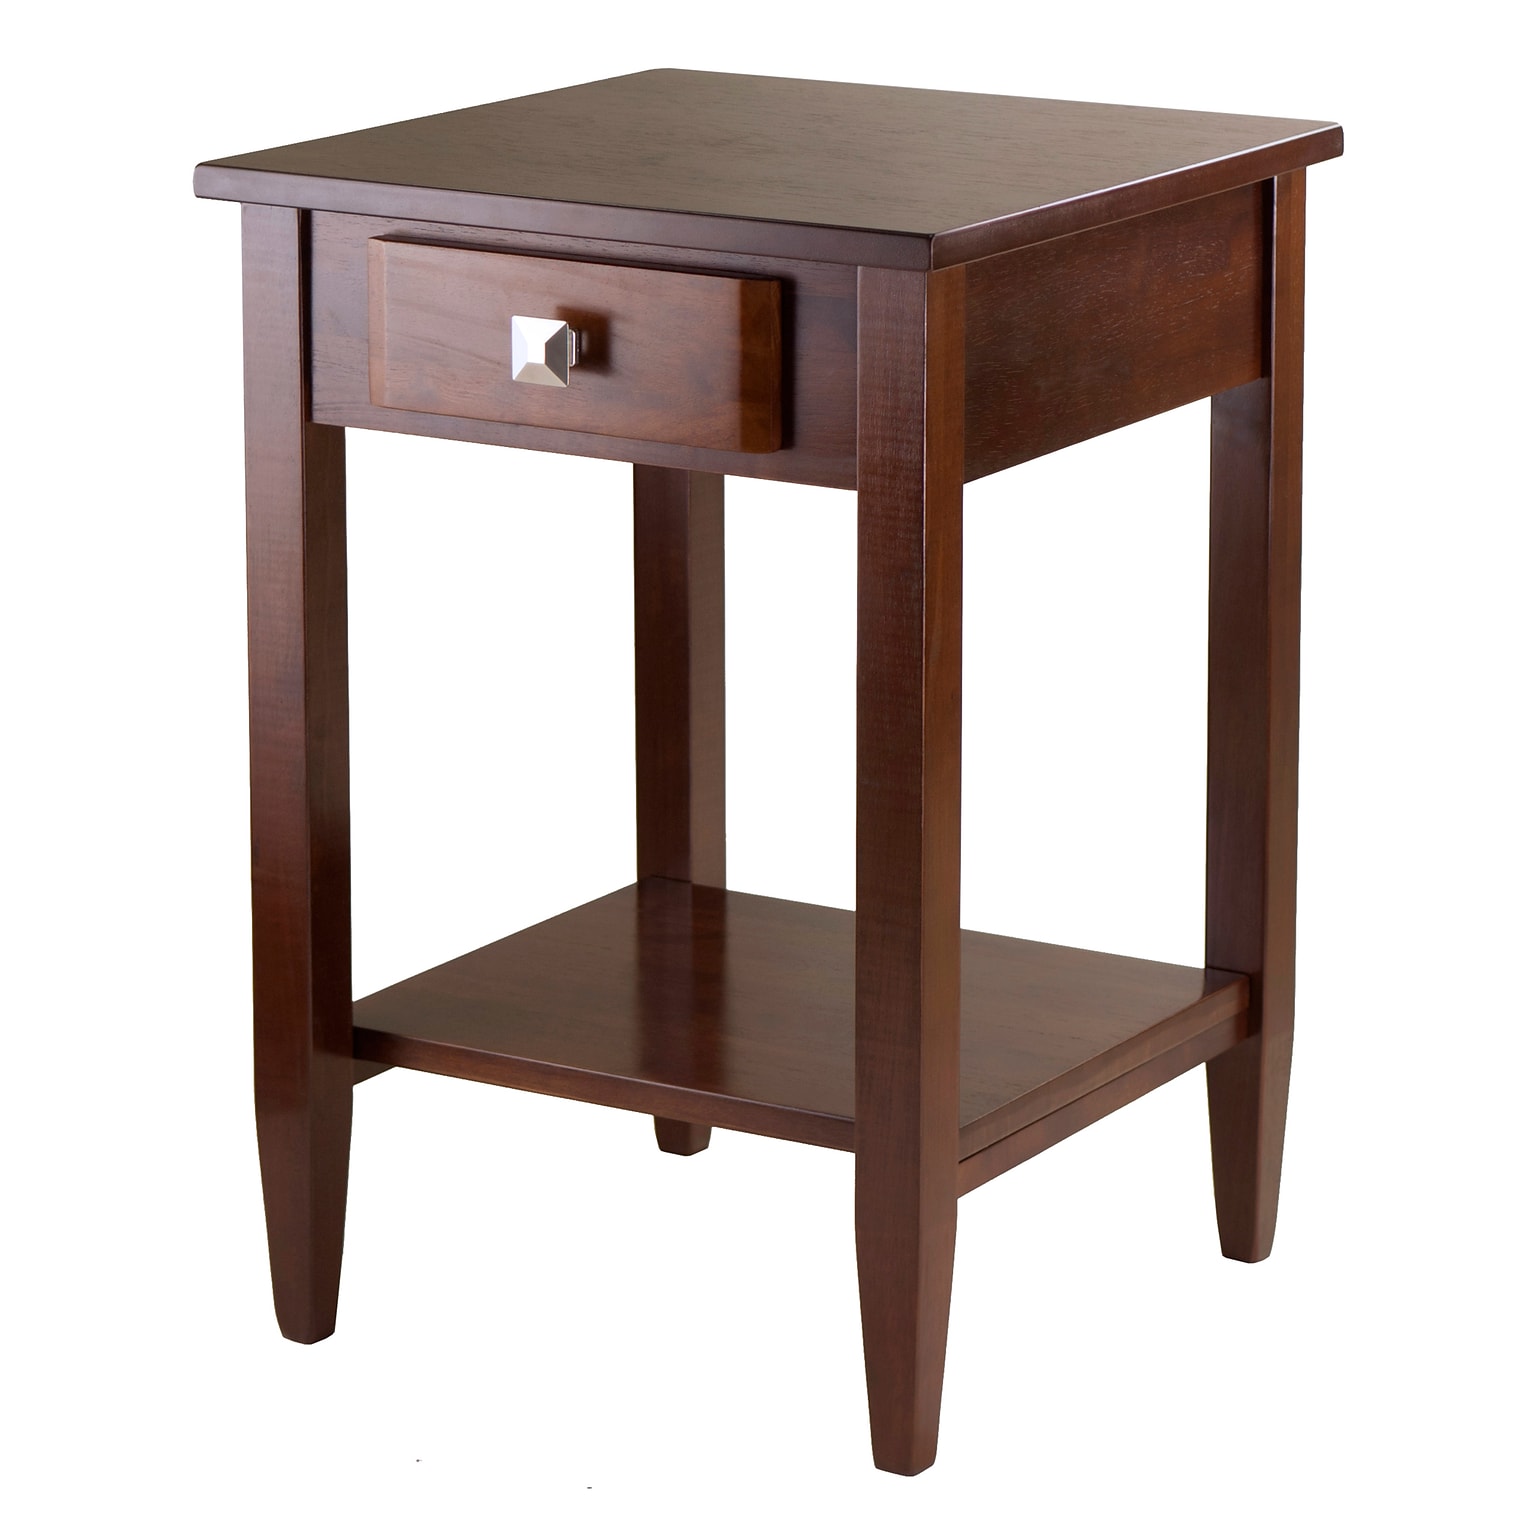 Winsome Richmond 25.98 x 17.95 x 18.68 Wood End Table Tapered Leg, Antique Walnut